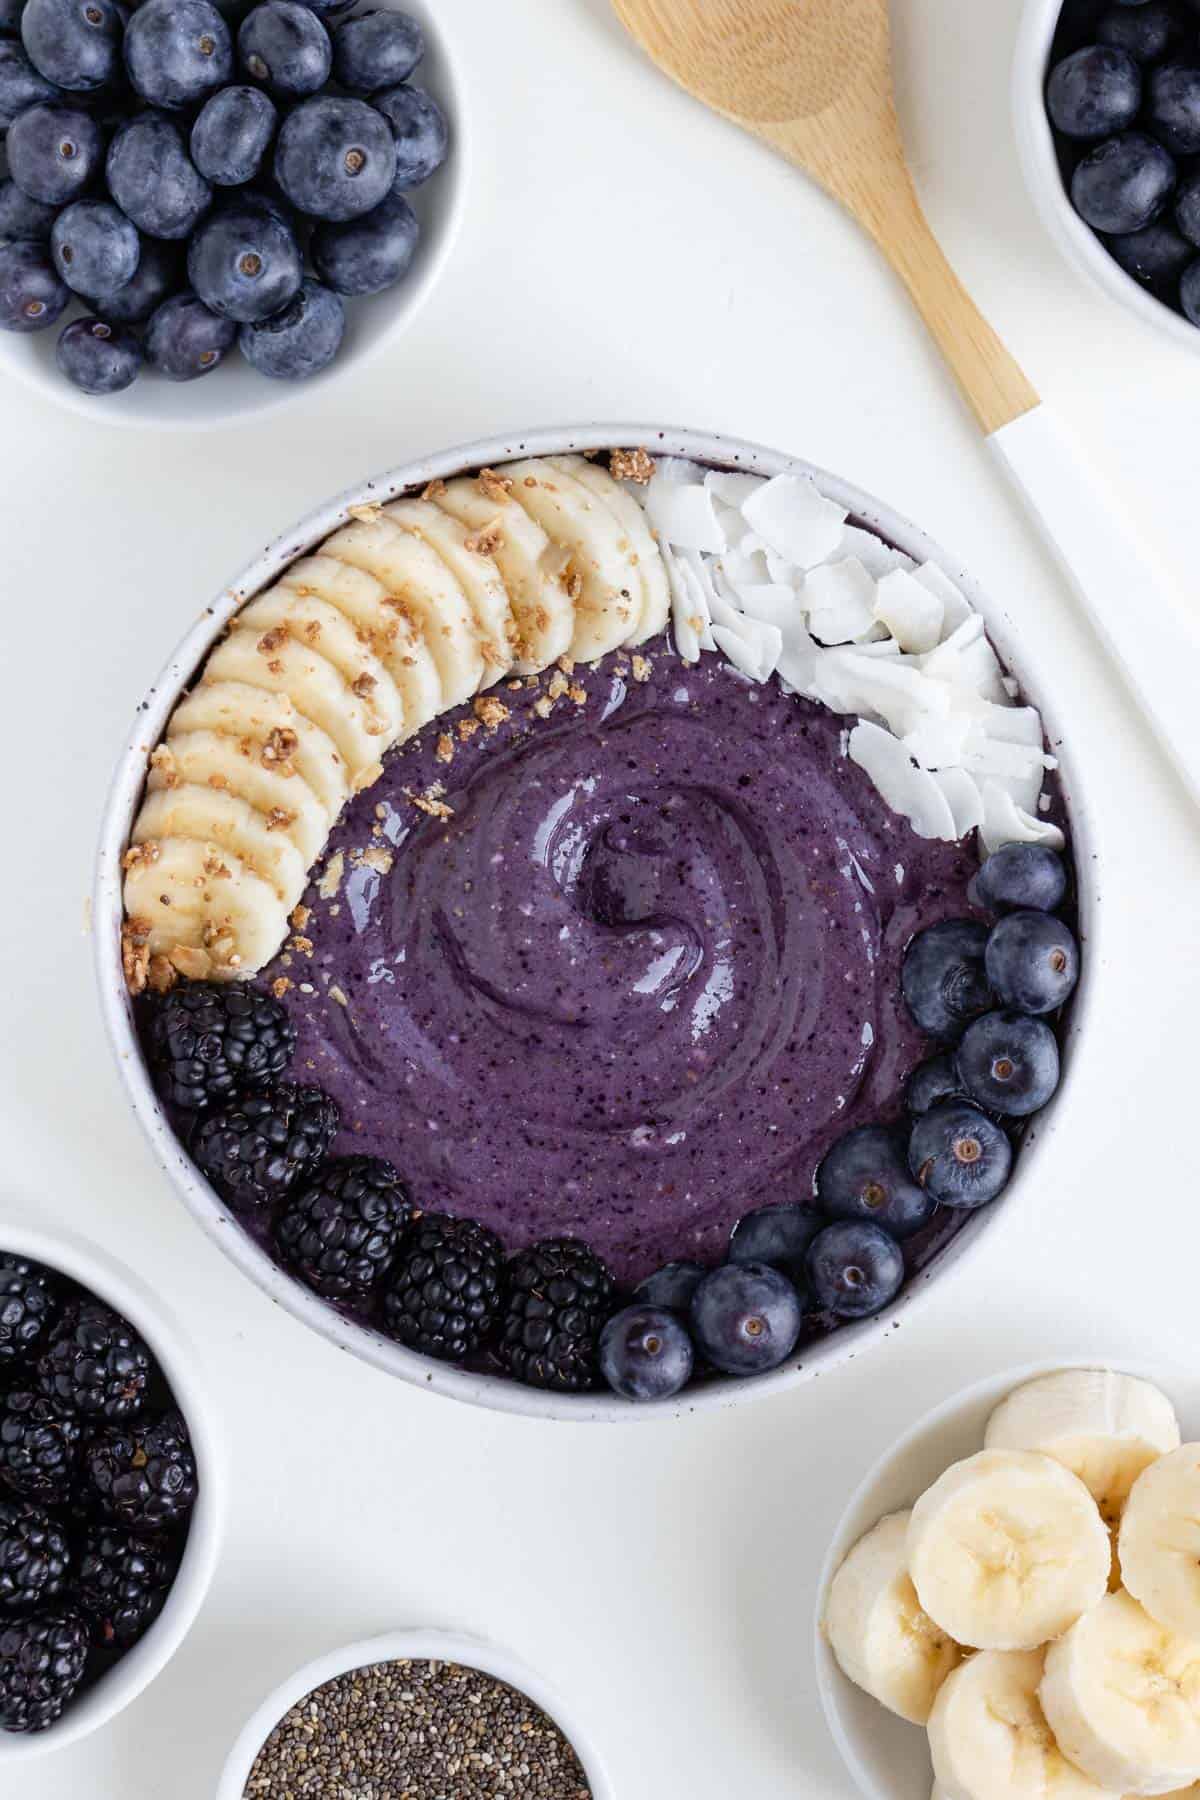 a blueberry banana smoothie bowl surrounded by a wooden spoon, a bowl of berries, a bowl of chia seeds, and a bowl of sliced bananas